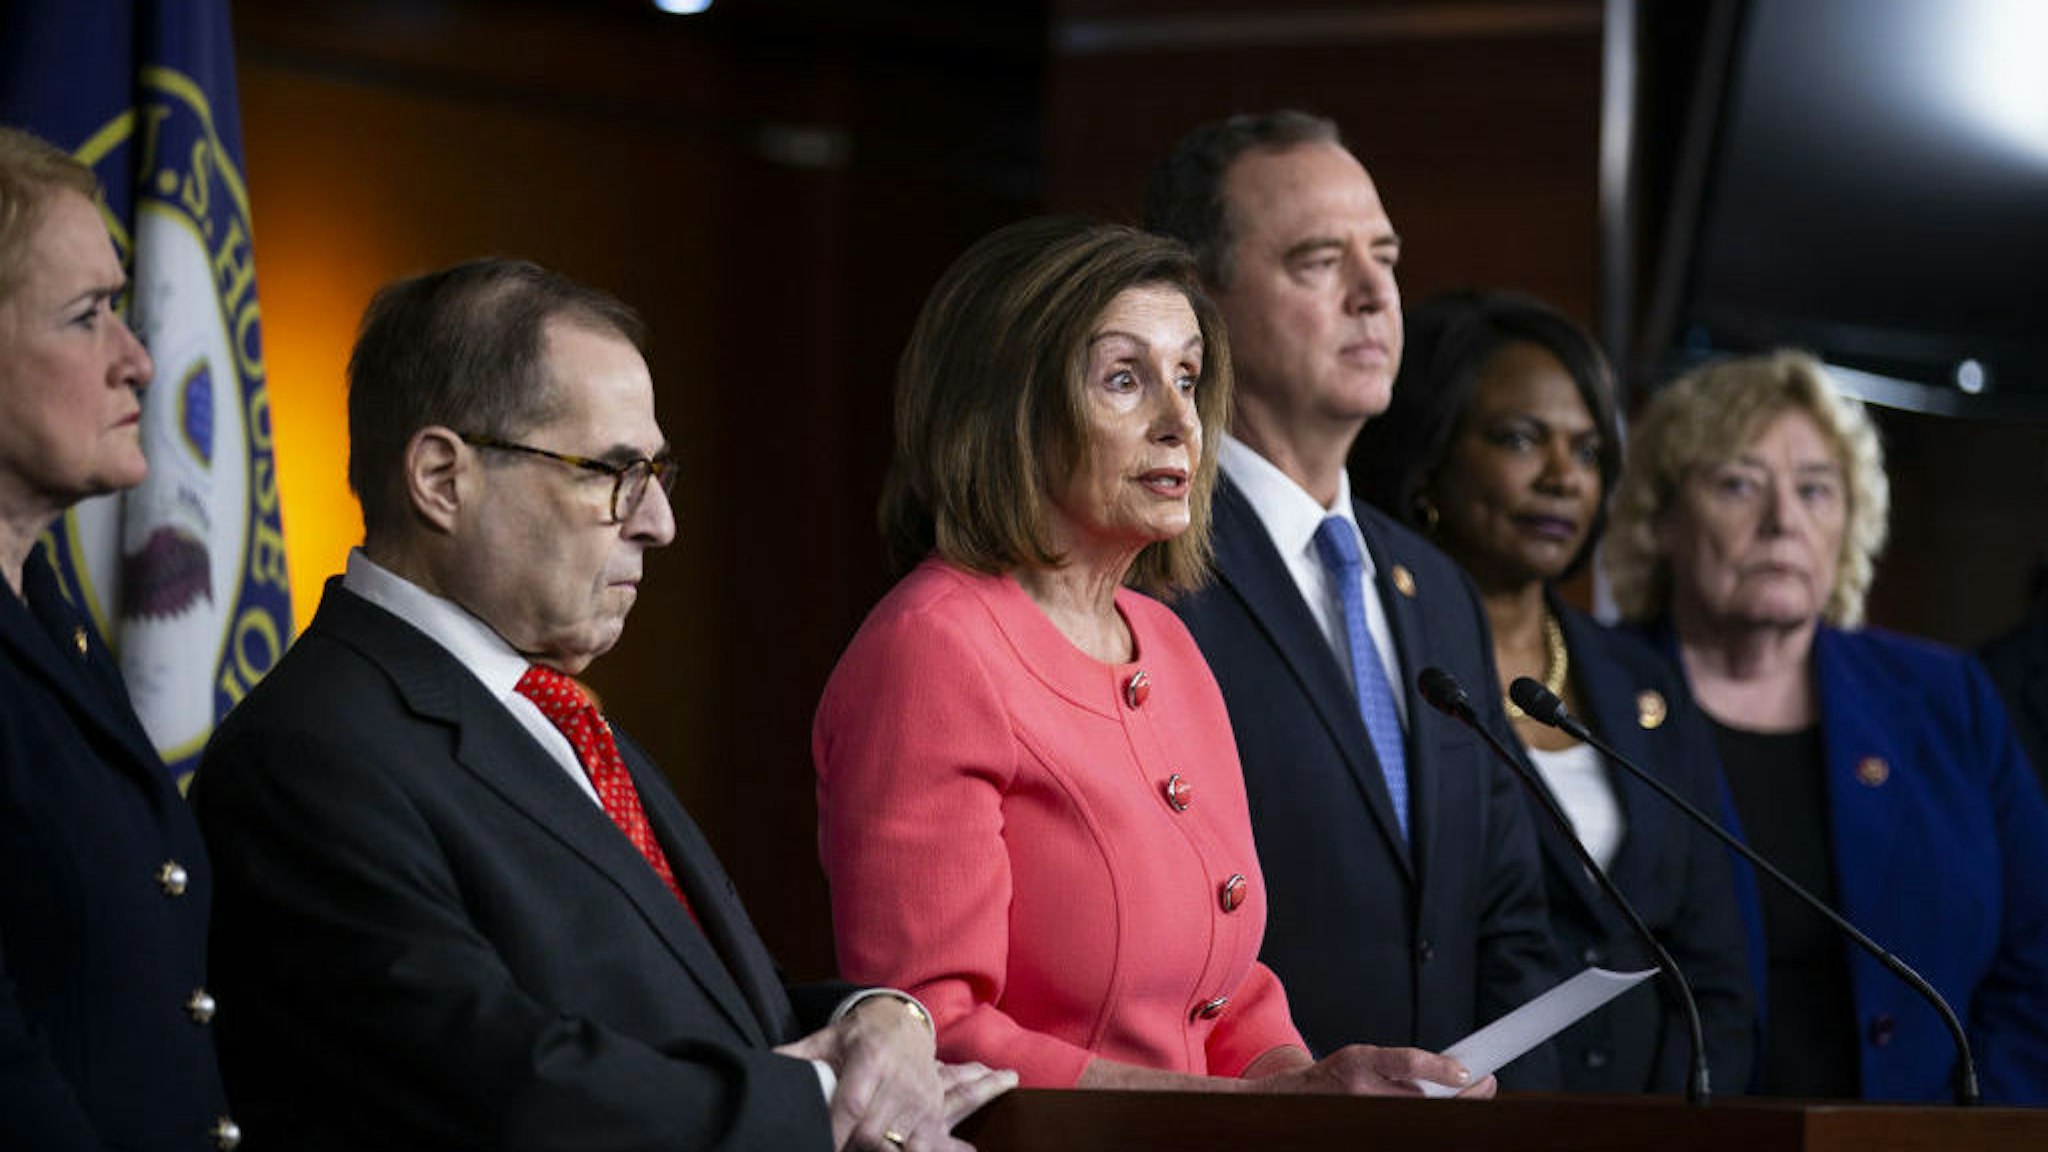 U.S. House Speaker Nancy Pelosi, a Democrat from California, center, speaks as Representative Jerry Nadler, a Democrat from New York and chairman of the House Judiciary Committee, left, and Representative Adam Schiff, a Democrat from California and chairman of the House Intelligence Committee, right, listen during a news conference on Capitol Hill in Washington, D.C., U.S., on Wednesday, Jan. 15, 2020. Schiff will lead a team of seven managers who will present the impeachment case against President Donald Trump in the Senate, Pelosi said. Photographer: Al Drago/Bloomberg